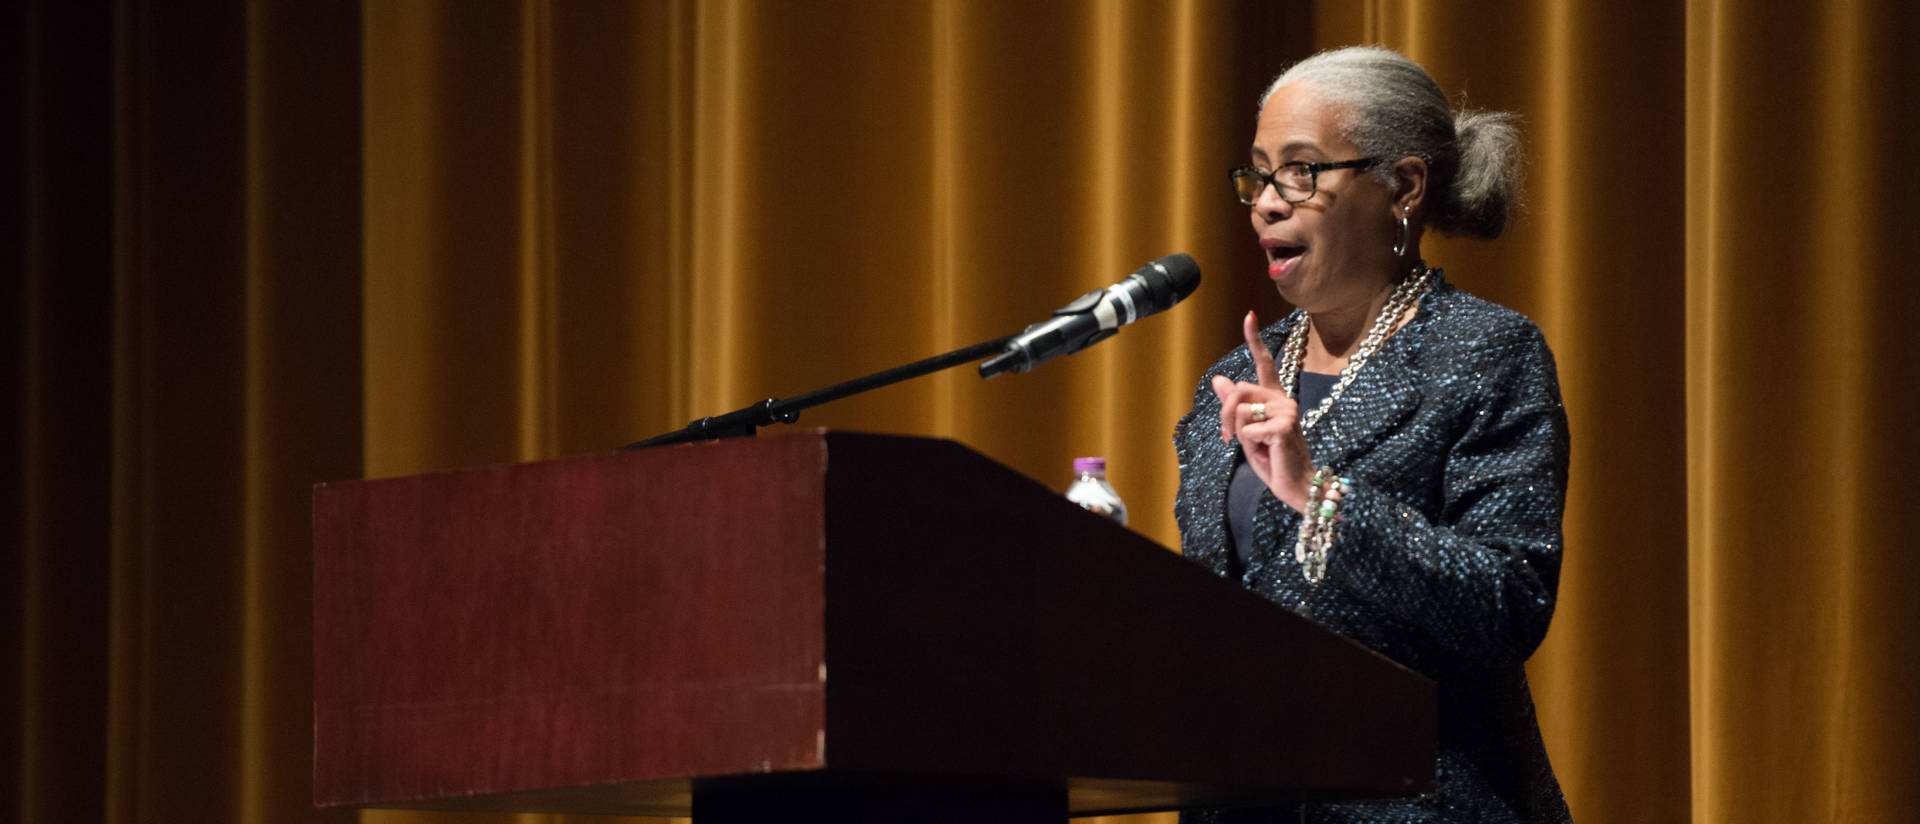 Gloria Ladson-Billings presents during the 2017 Martin Mogensen Education Lecture on culturally relevant pedagogy.